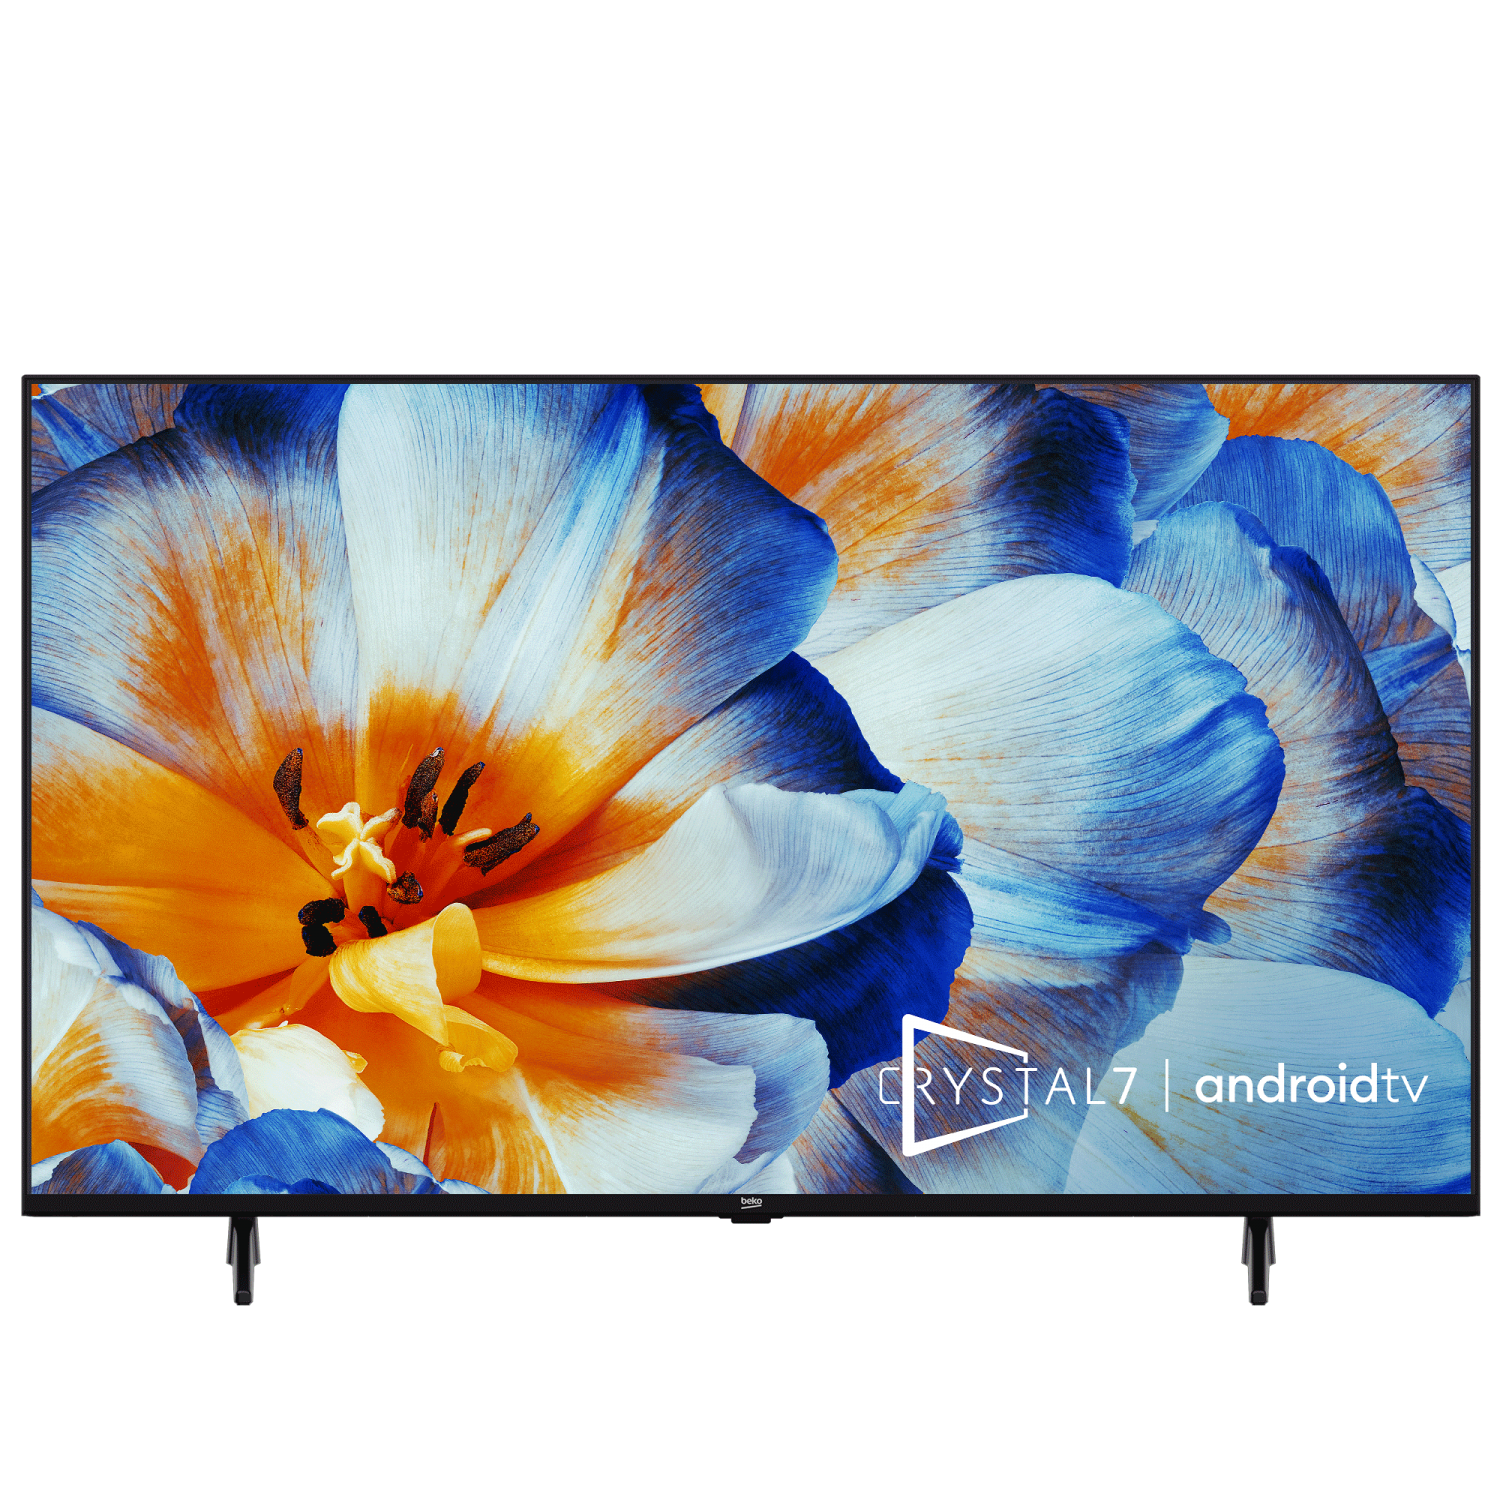 Crystal 7 B65 D 790 B / 65" 4K Smart Android TV